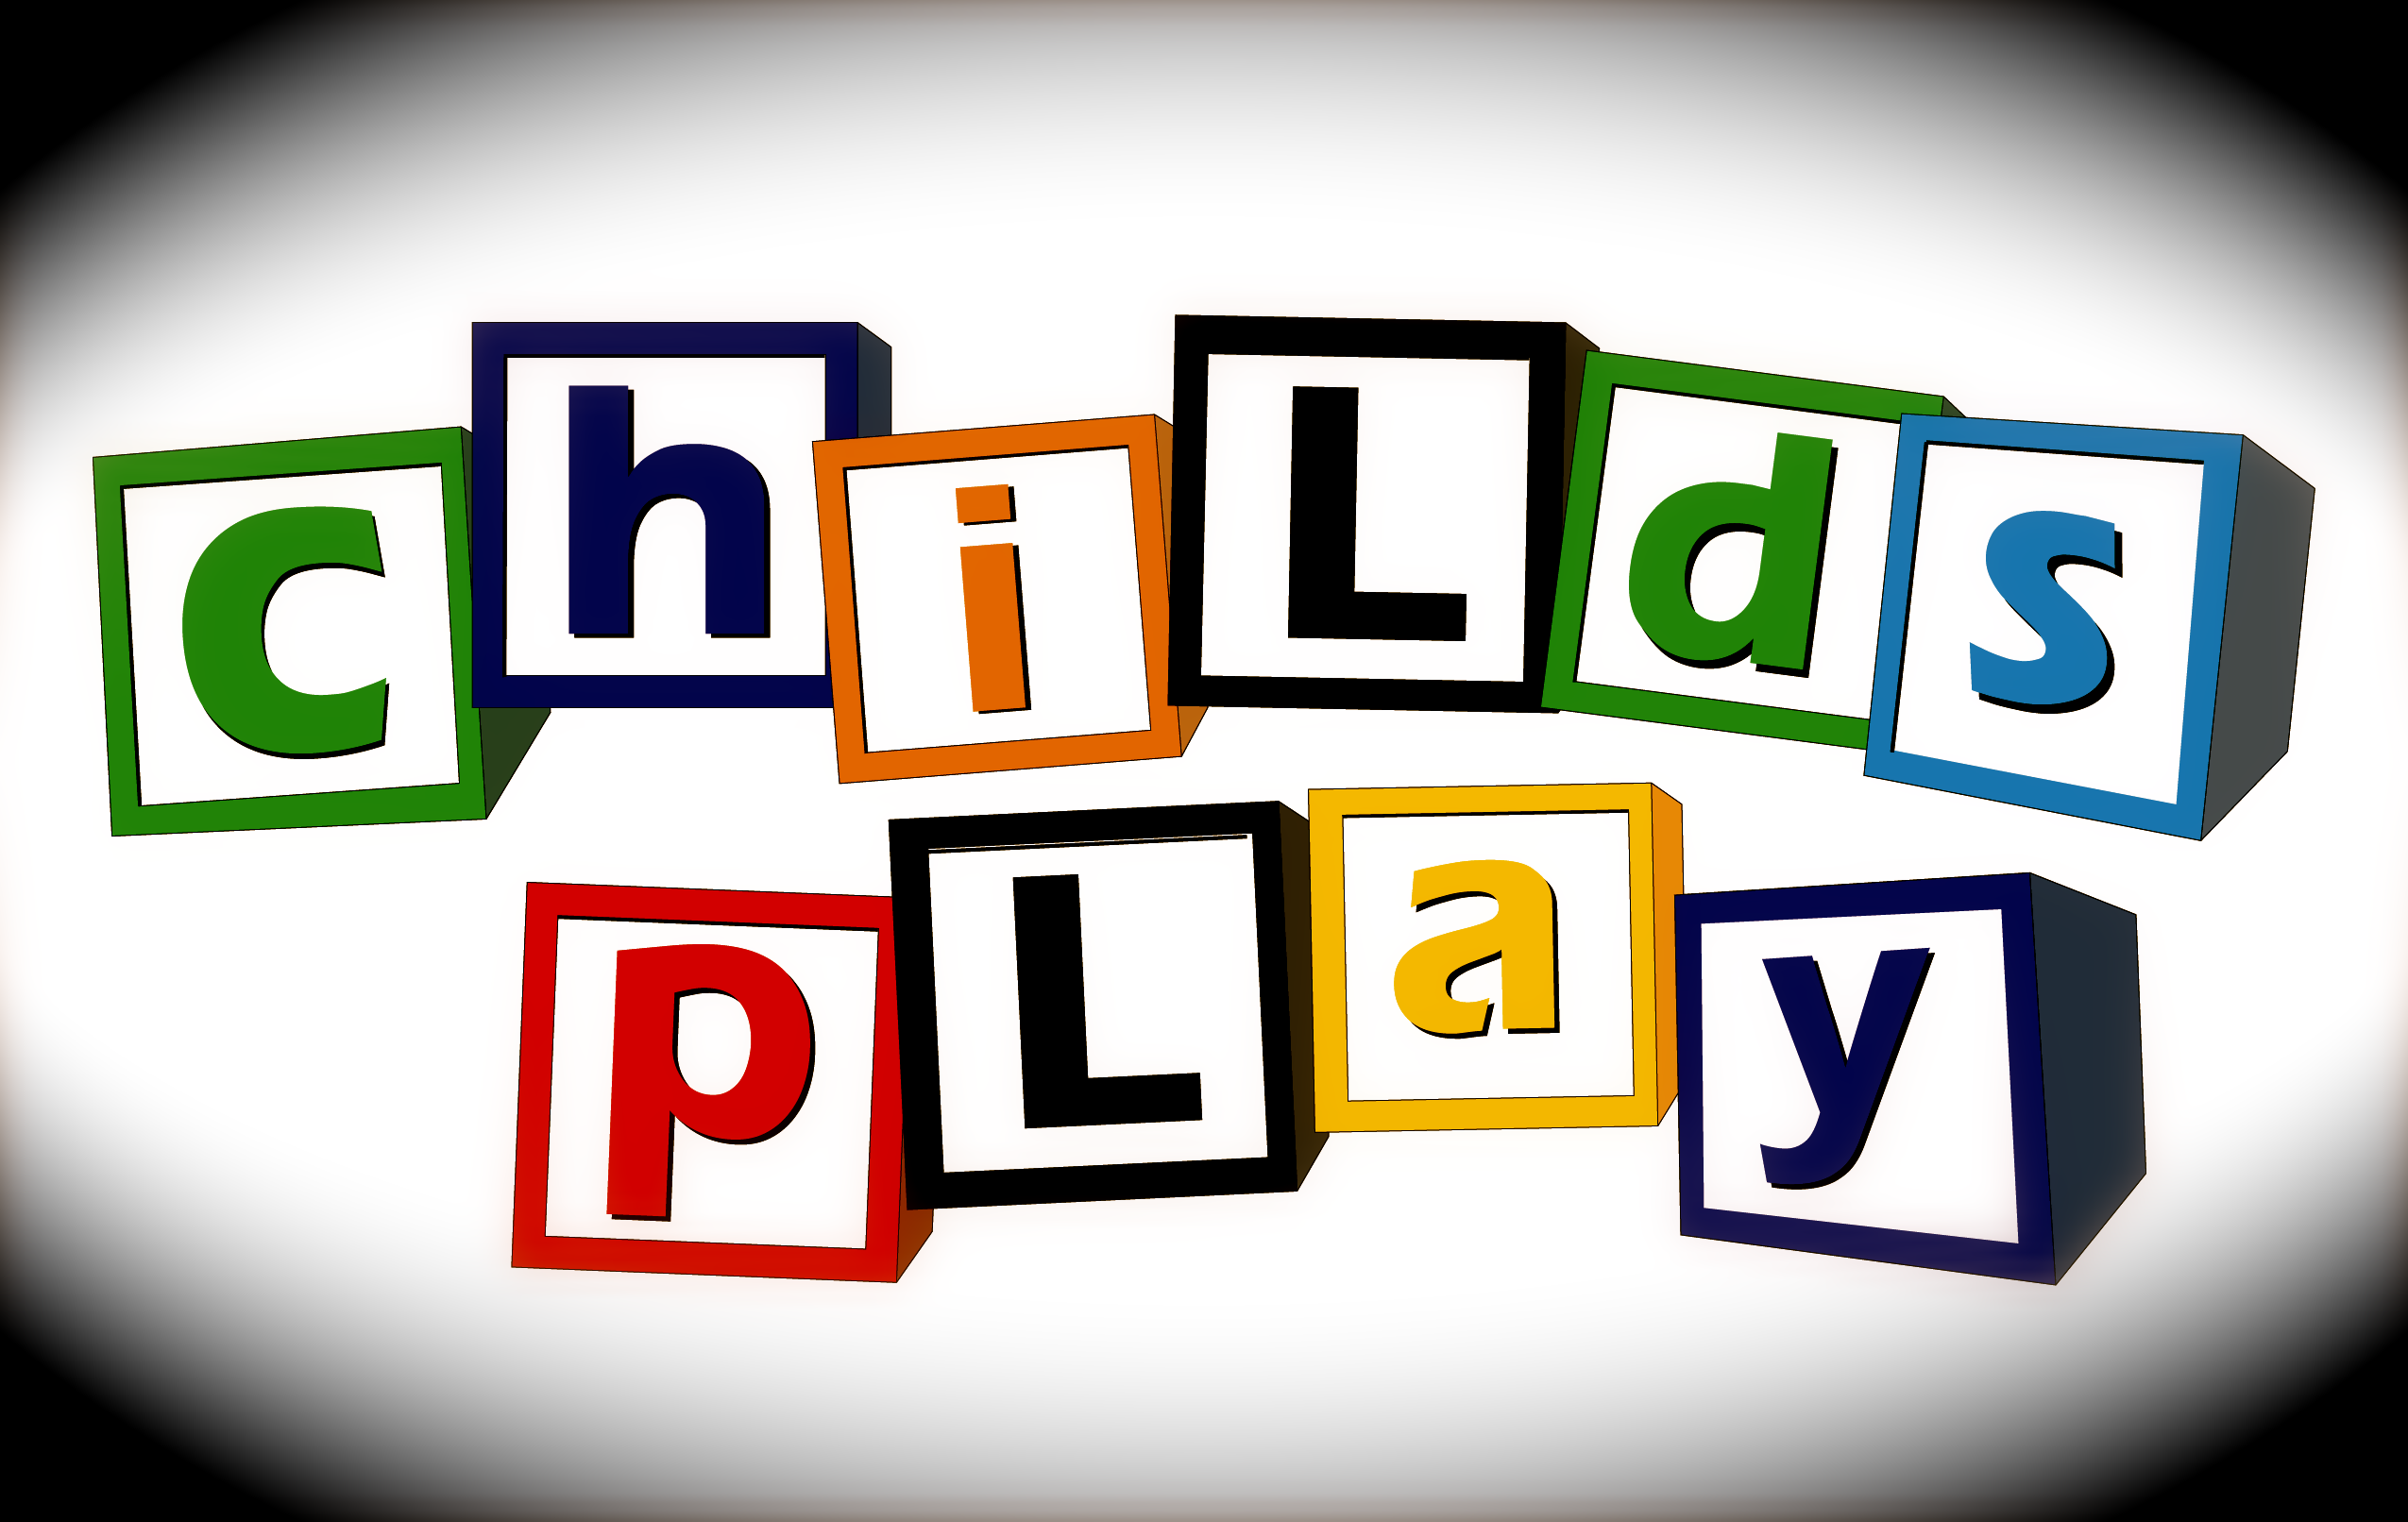 childs-play-logo.png